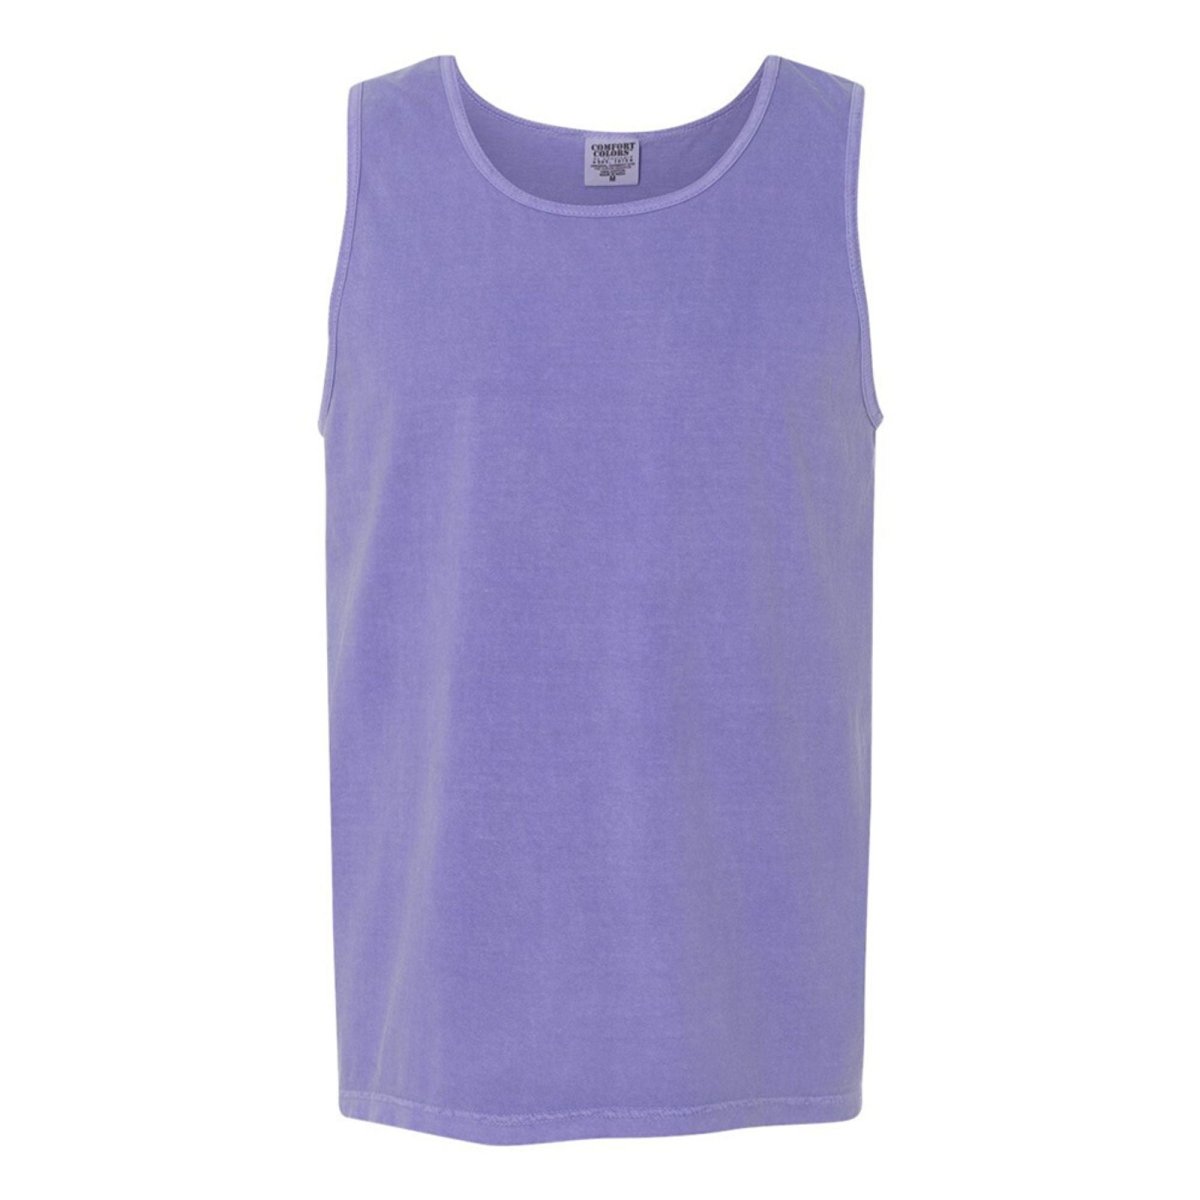 'The Cool Moms Club' PUFF Tank Top - United Monograms